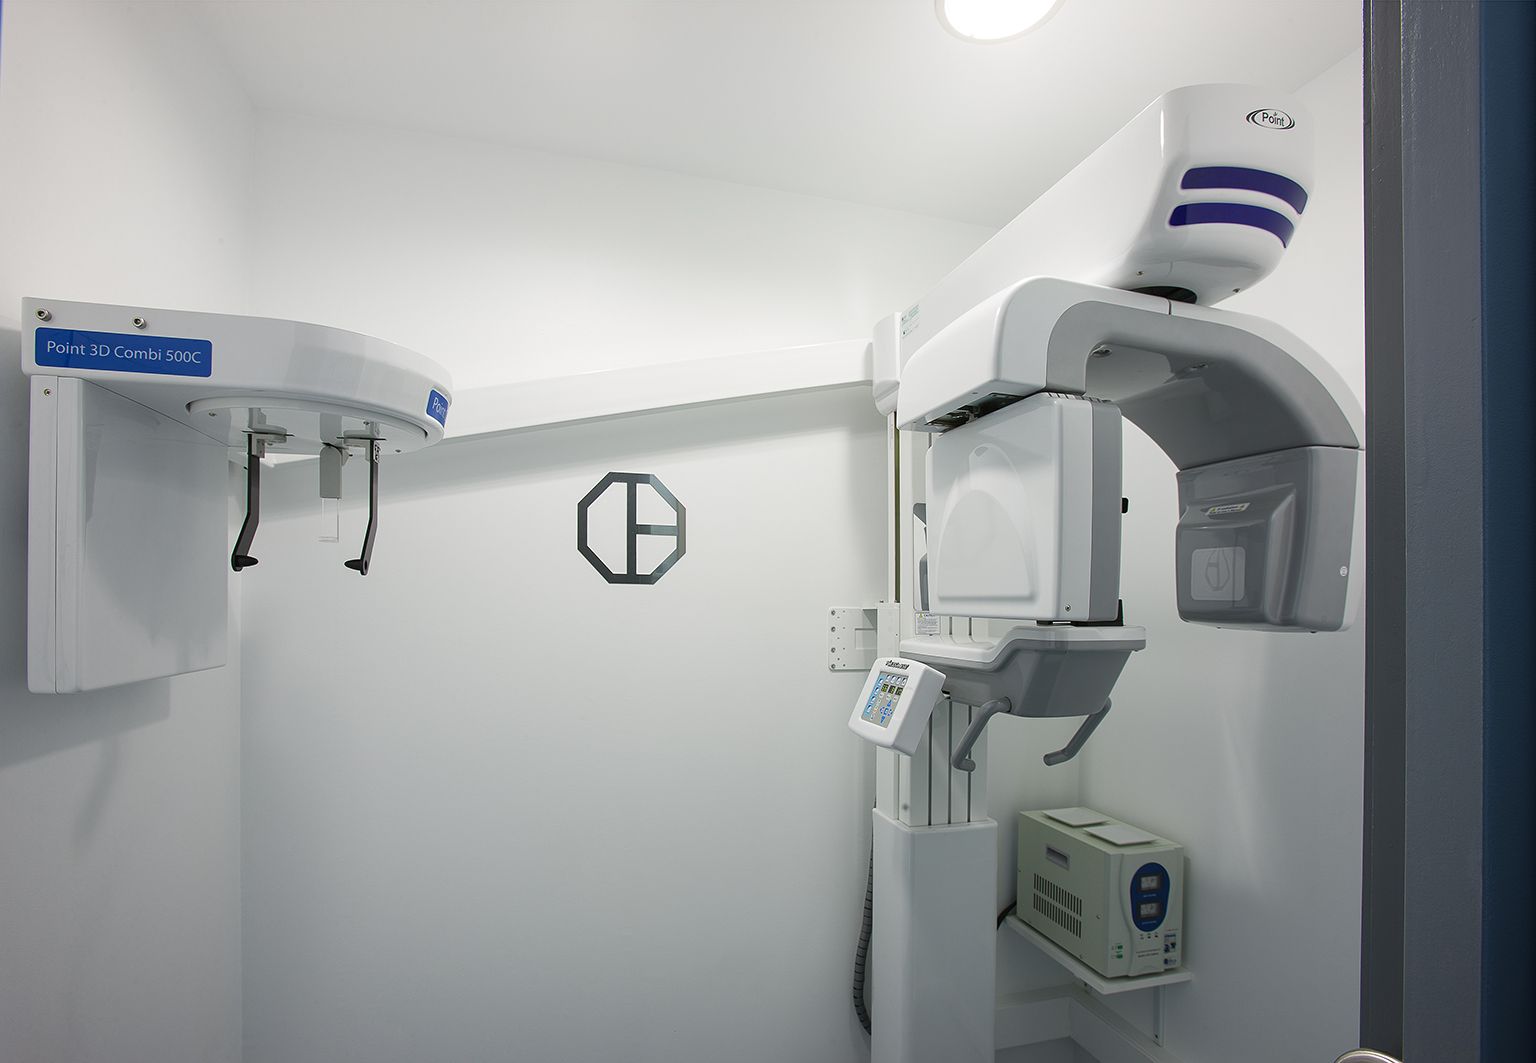 Dental clinic Padrós has the Pointnix 3D digital radiology system, with large size and high resolution sensor.